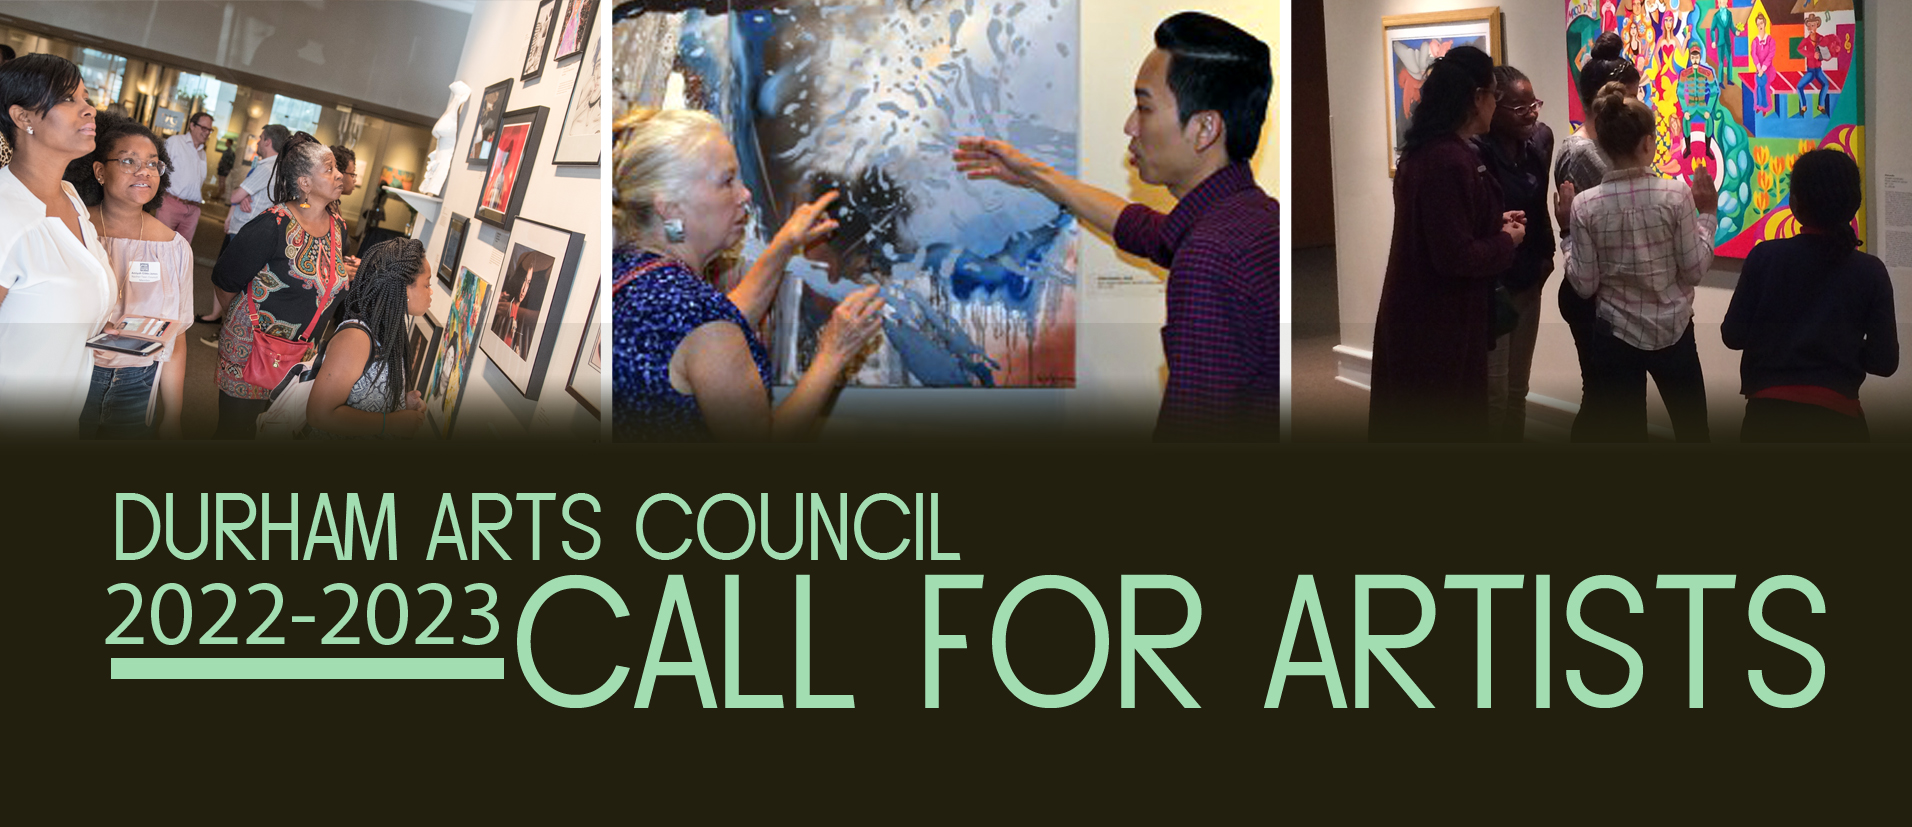 2022-23 DAC Call for Artists